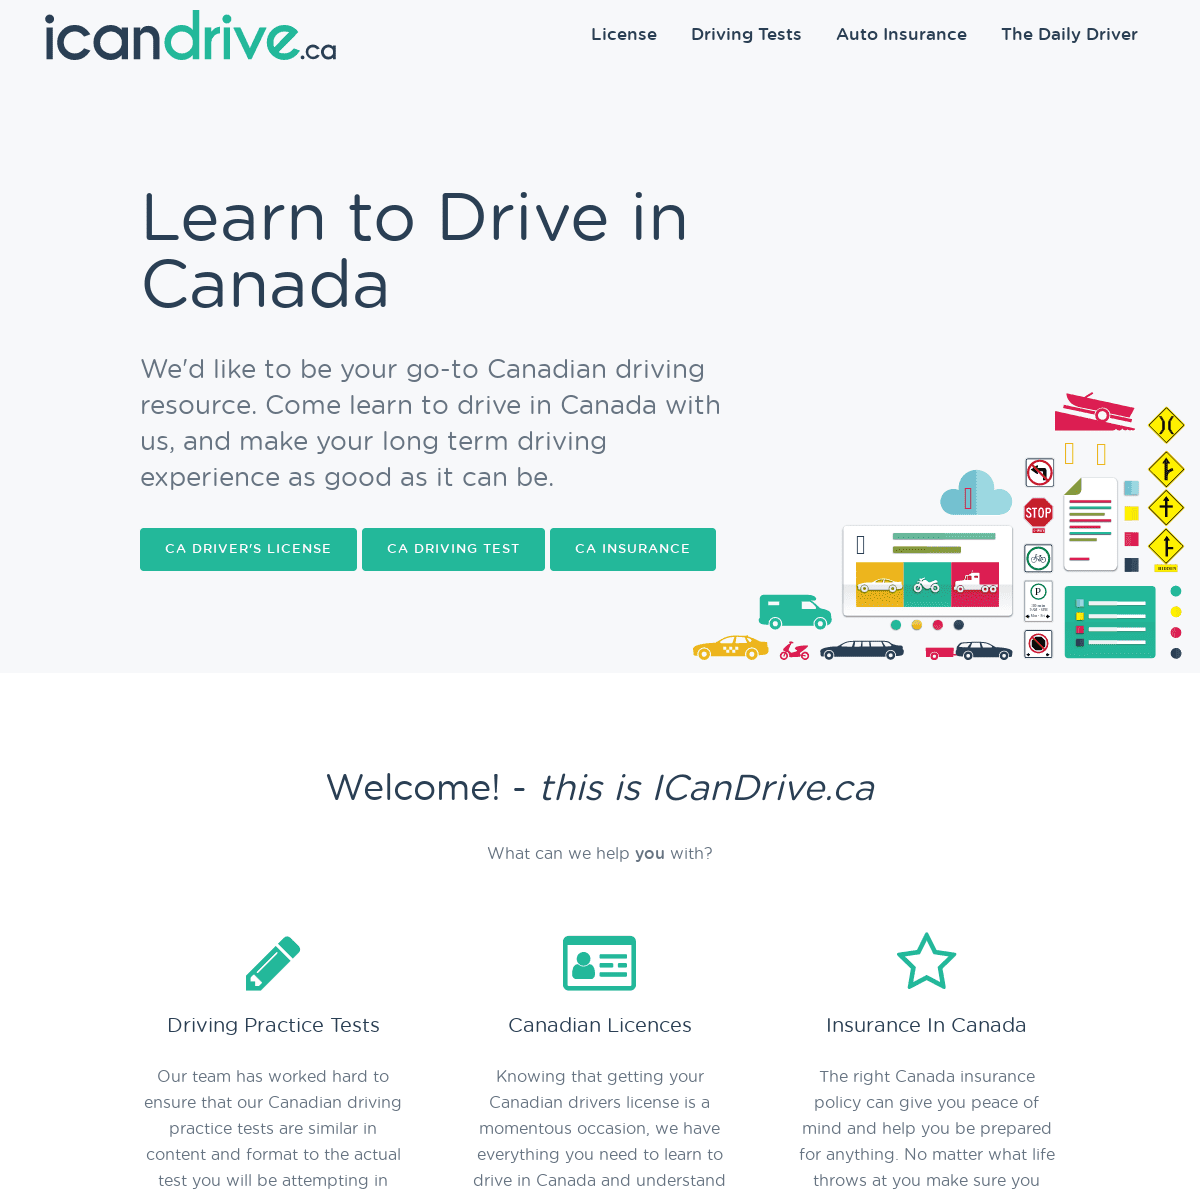 A complete backup of icandrive.ca